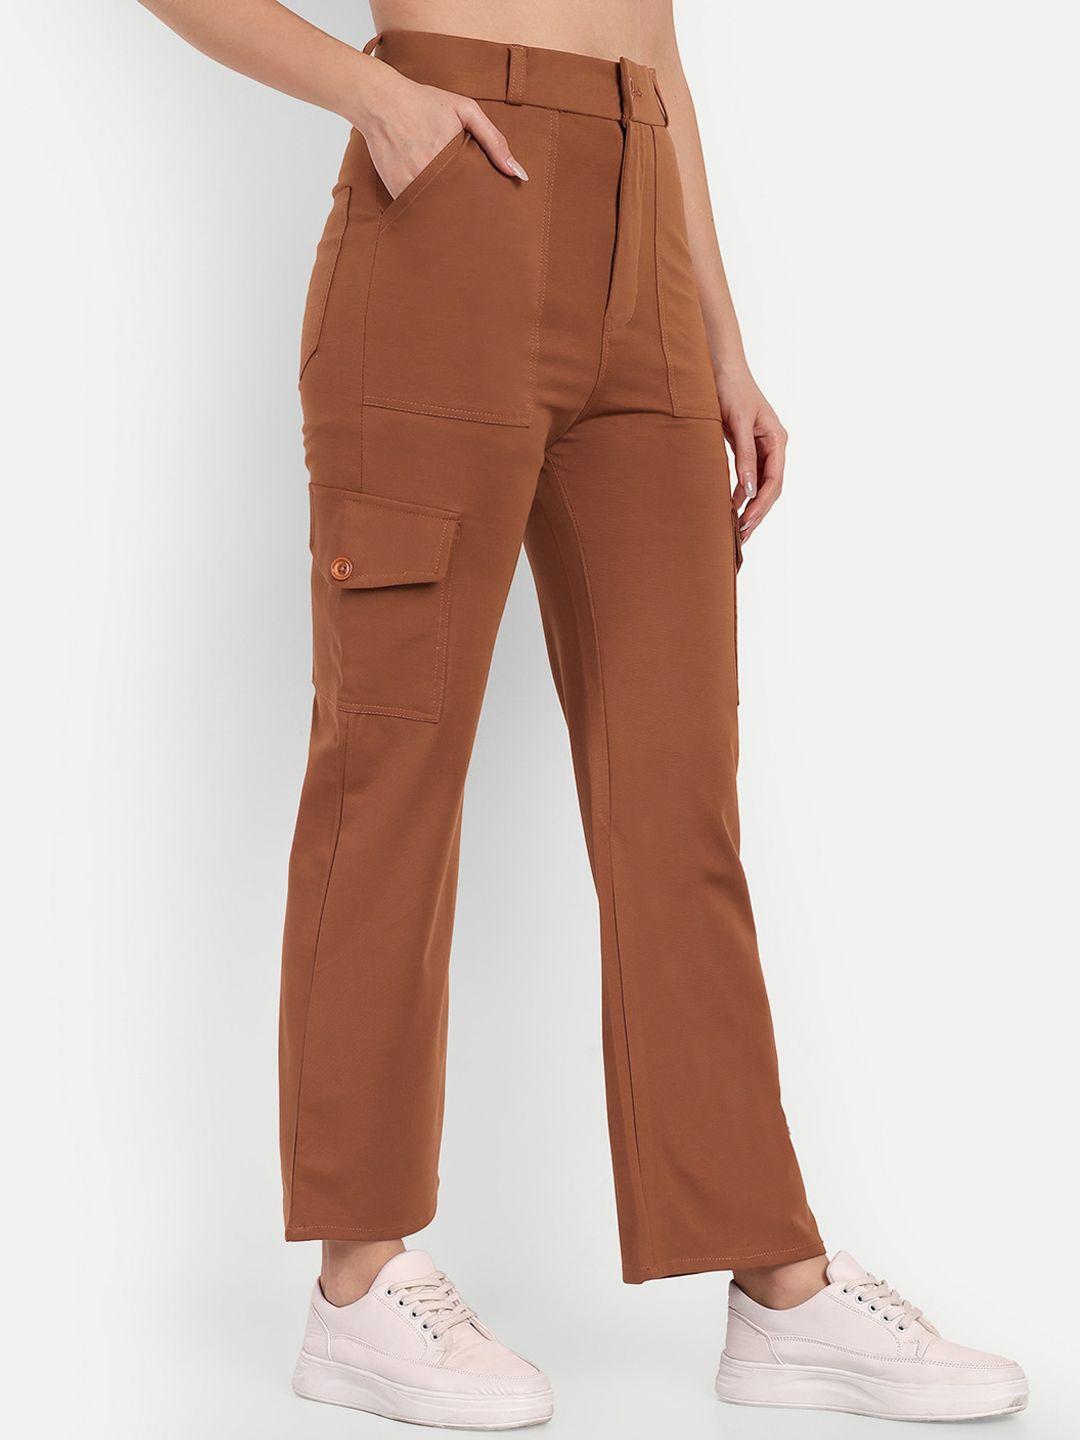 next-one-women-smart-high-rise-easy-wash-knitted-straight-fit-cargos-trousers